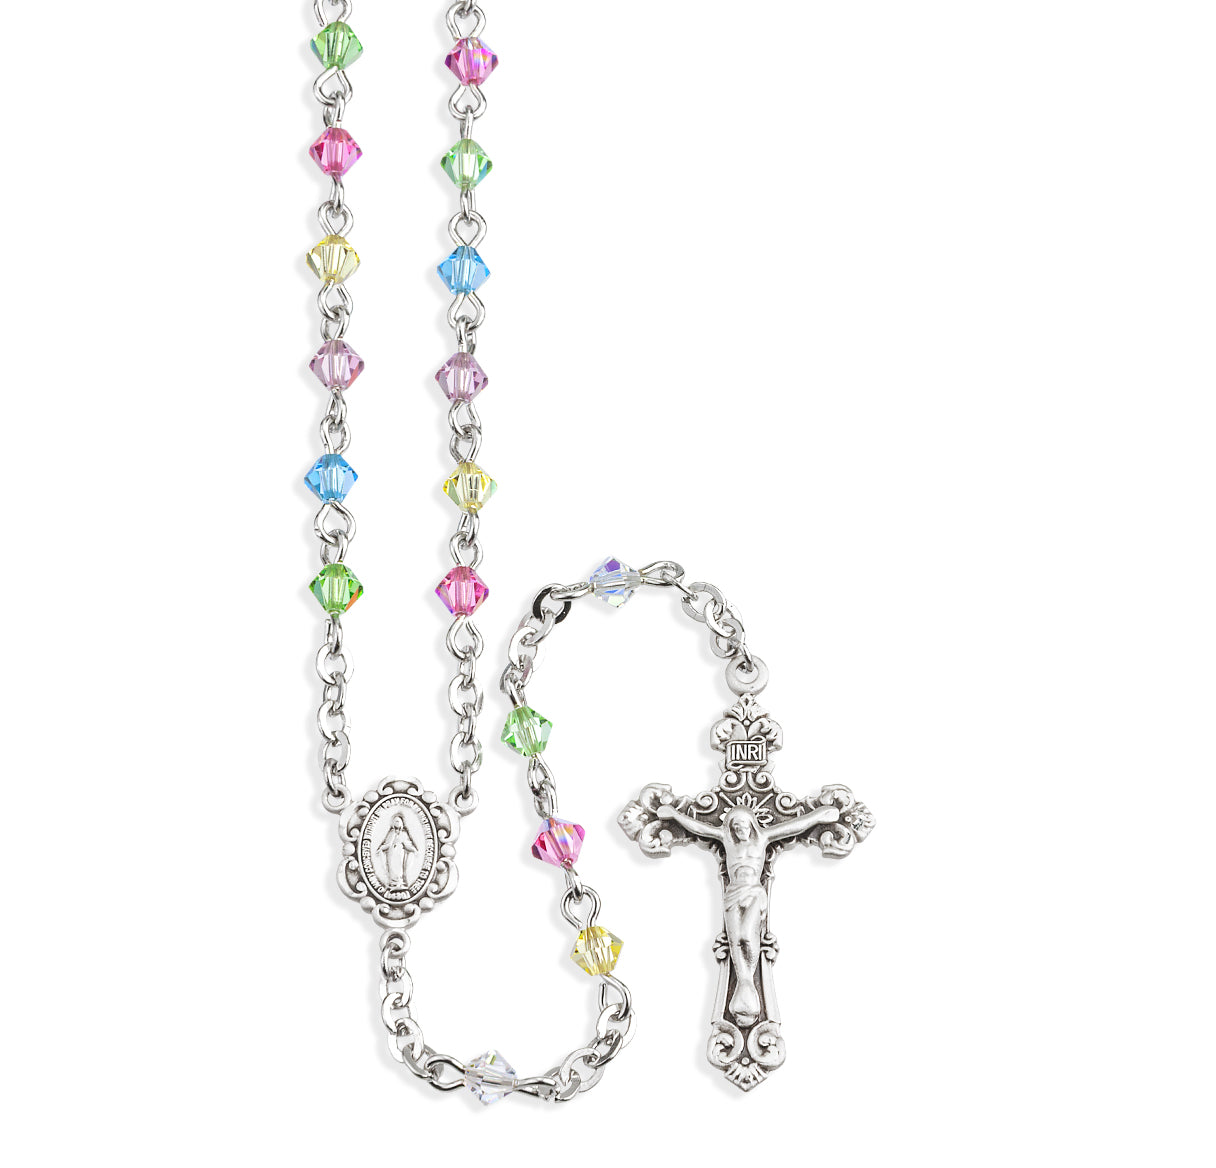 Rosary Sterling Crucifix and Centerpiece Created with Swarovski Crystal 4mm Faceted Tin Cut Bicone Beads in Multi-Color